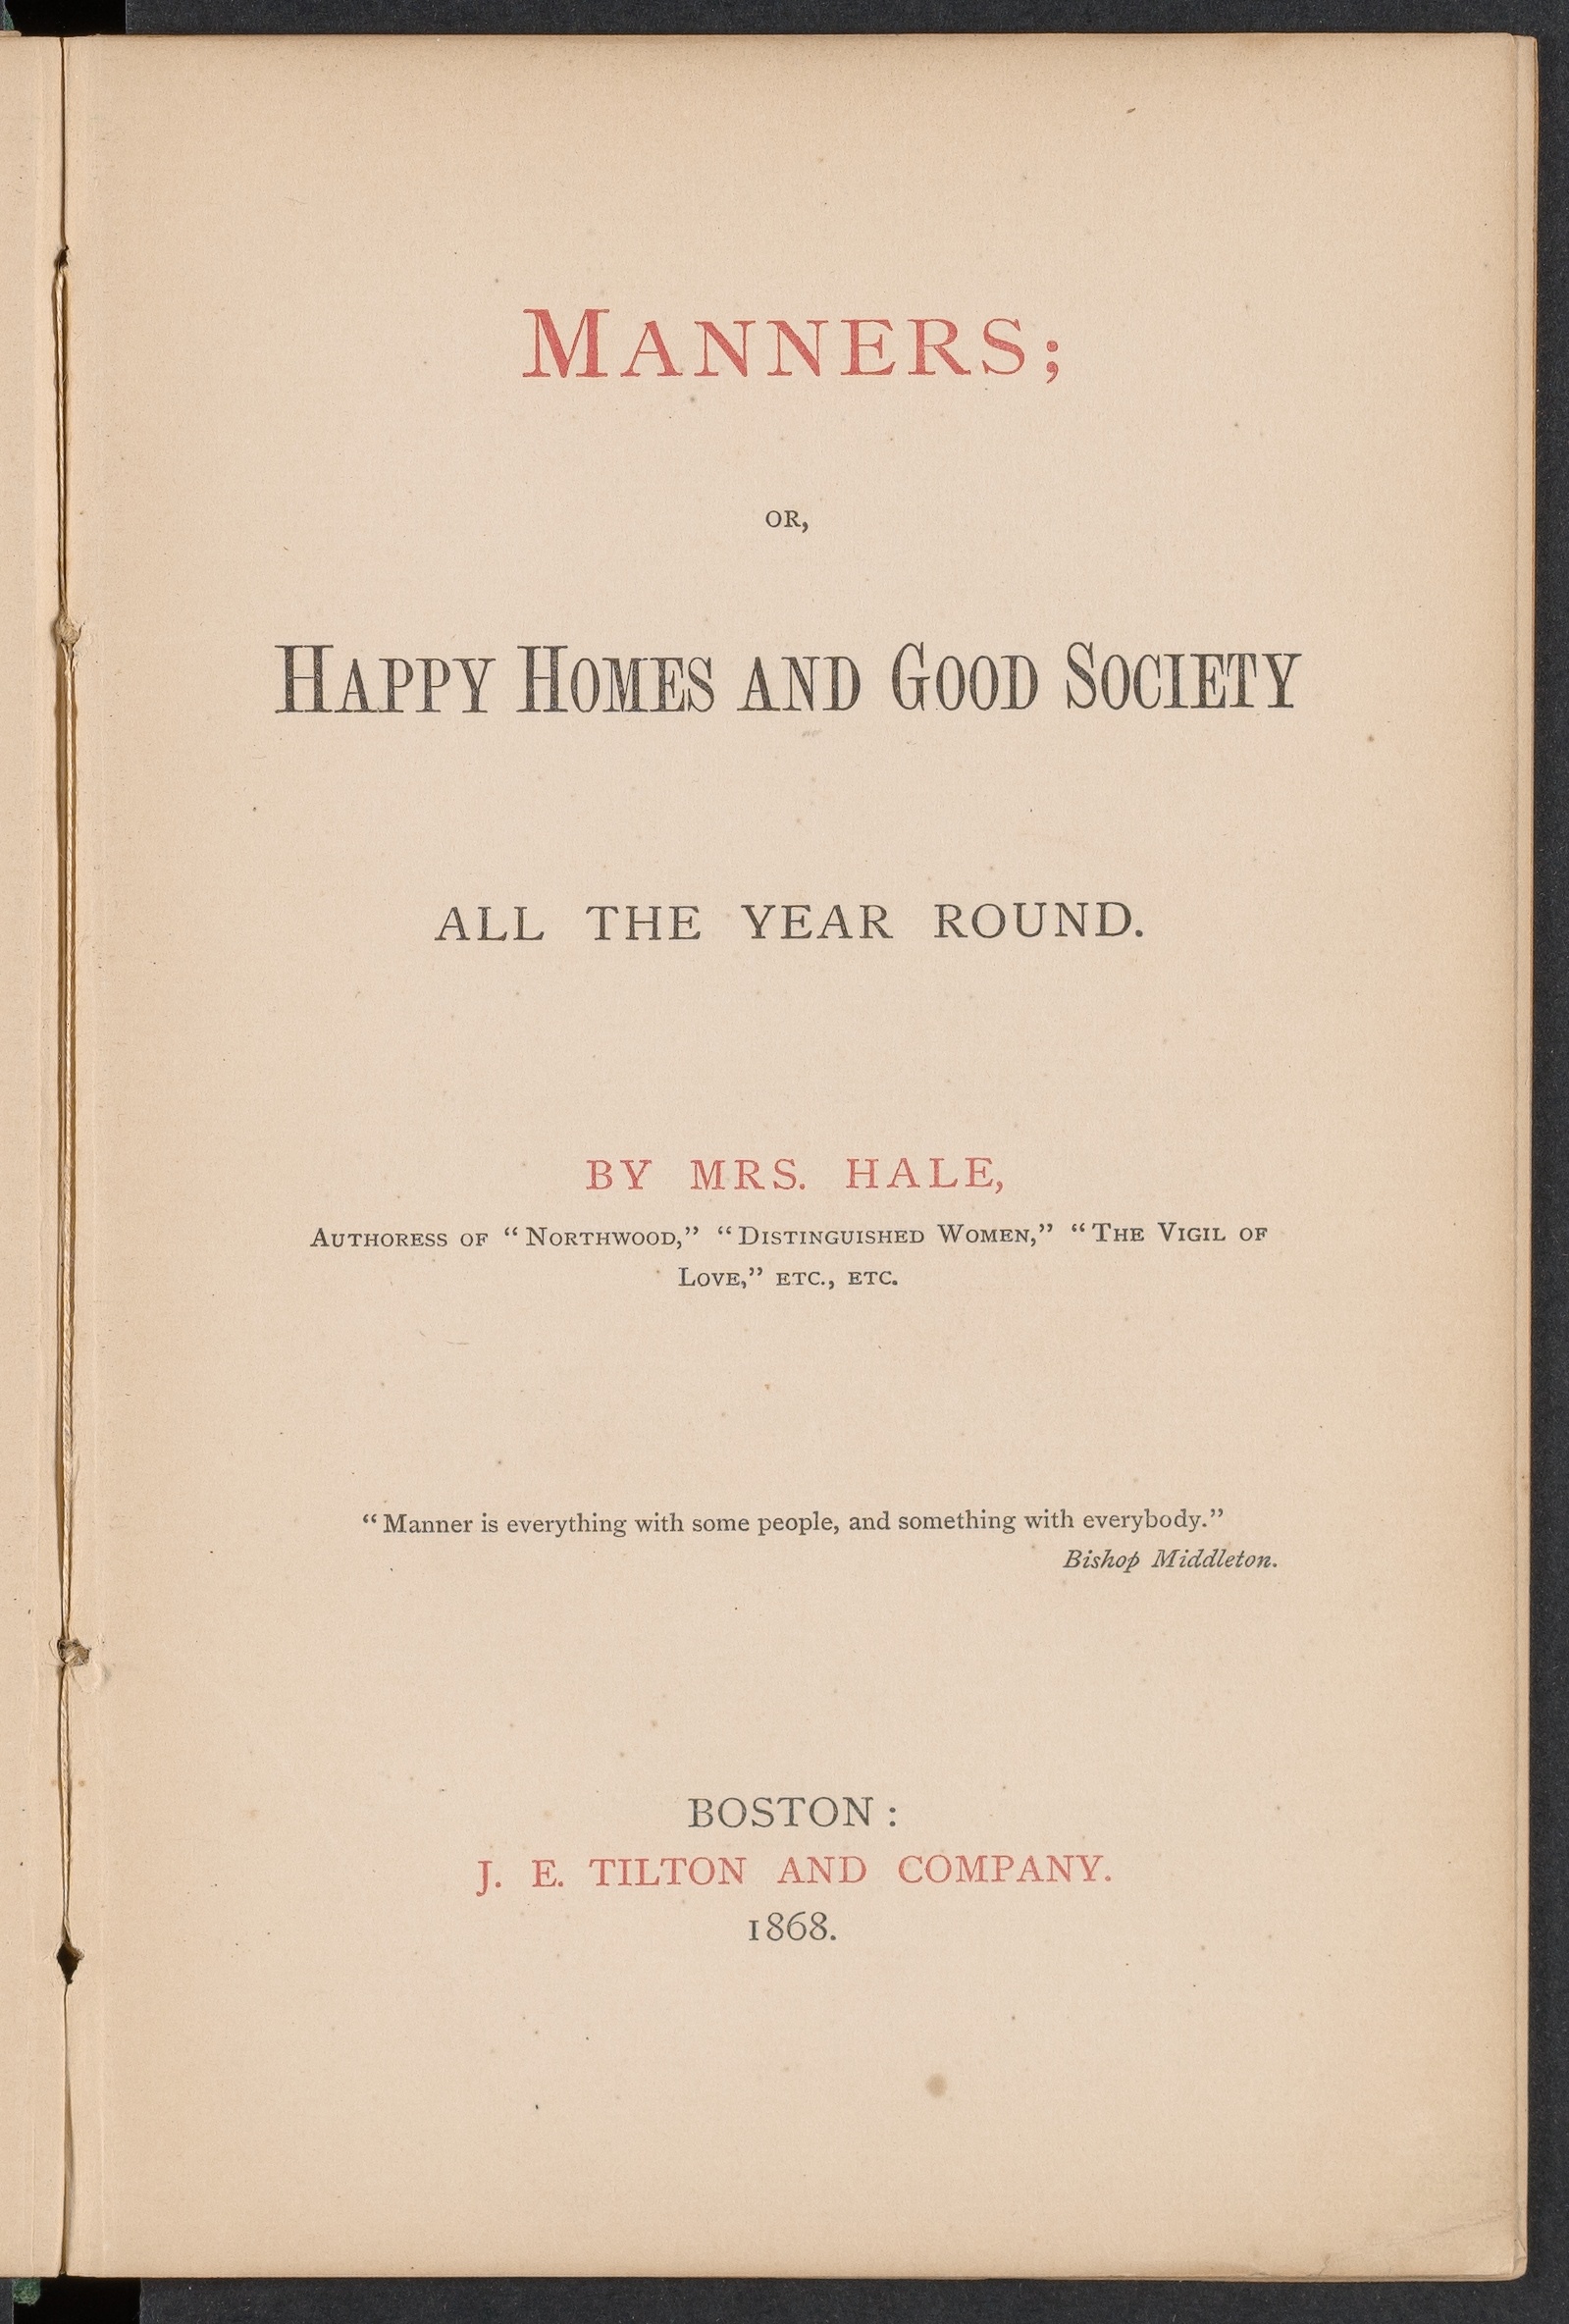 Manners: or, Happy Homes and Good Society